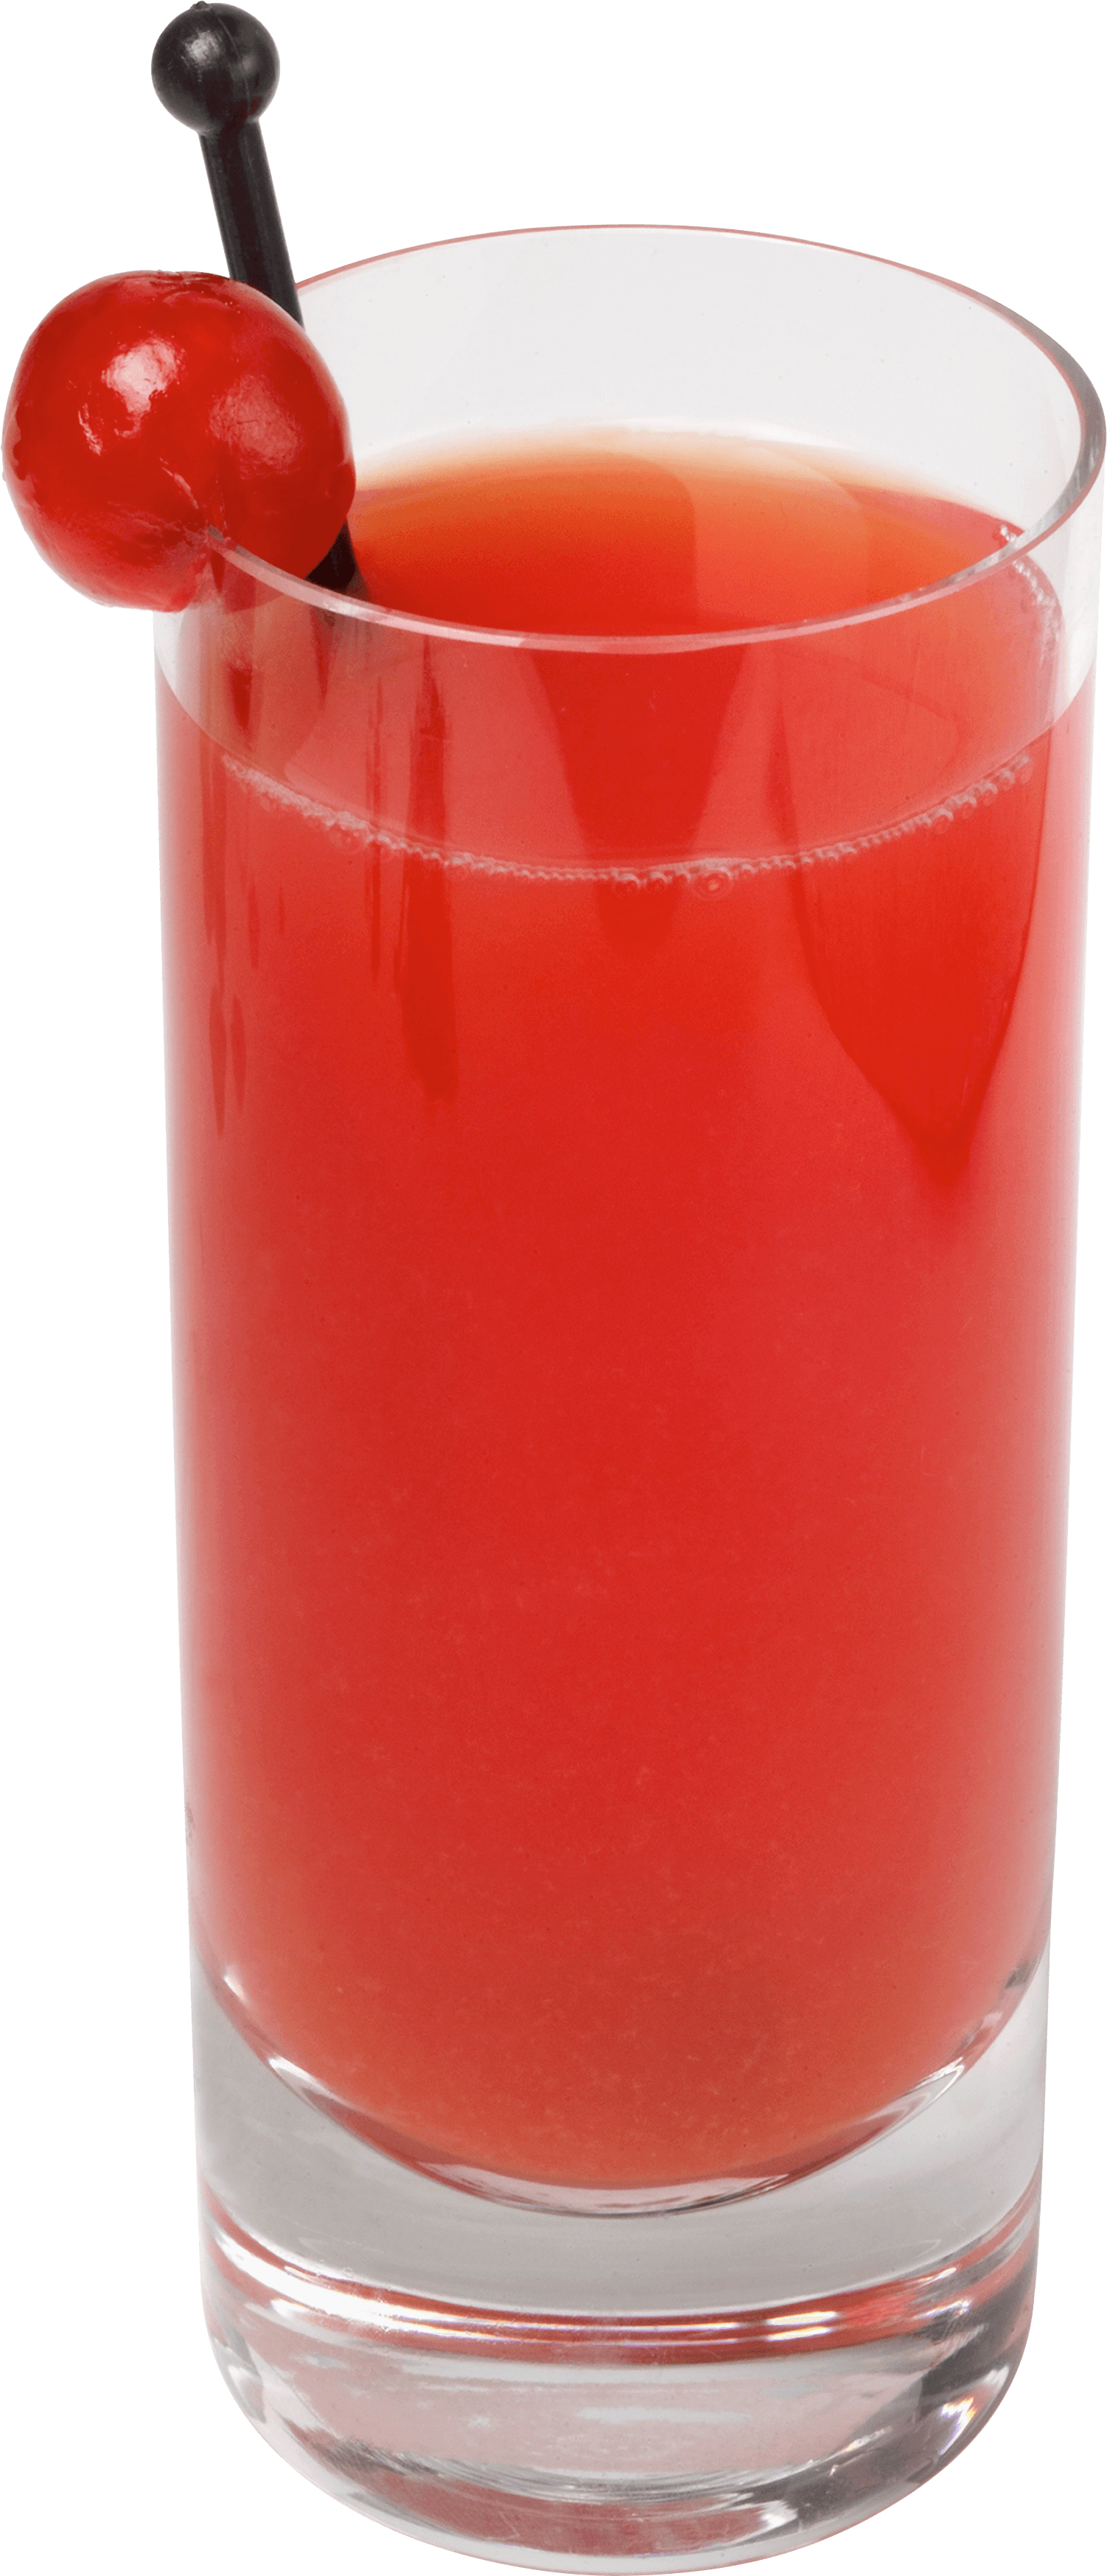 Red Juice Png Image PNG Image